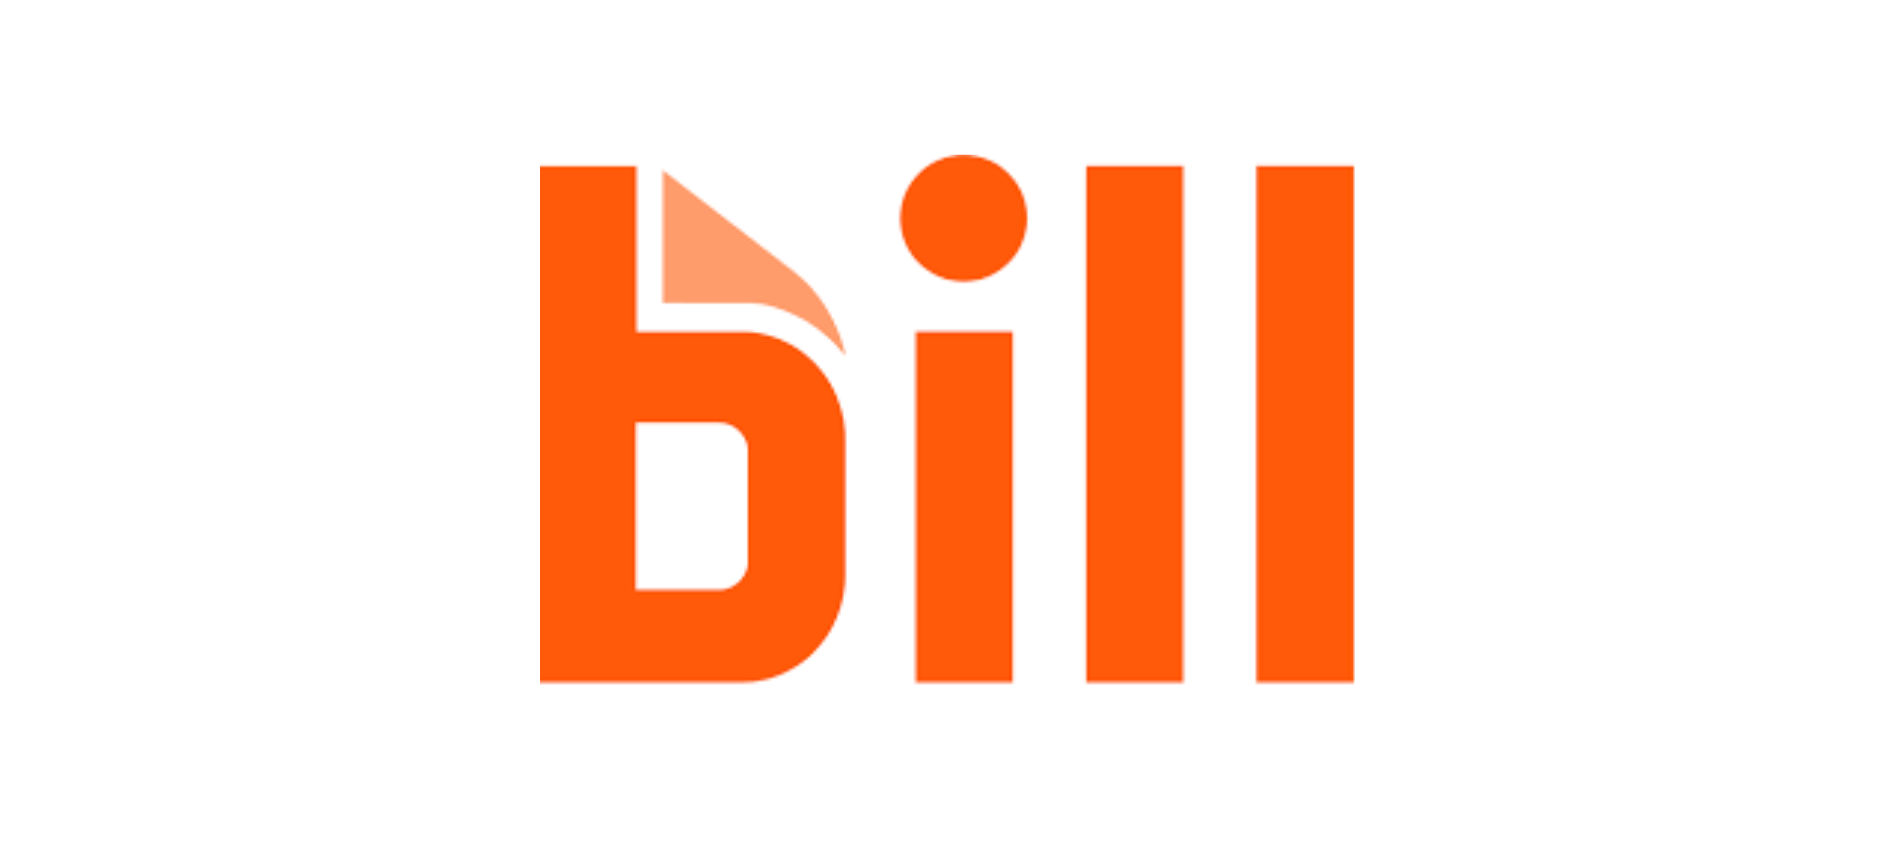 Who is Bill (Explanation of Bill.com for Suppliers)